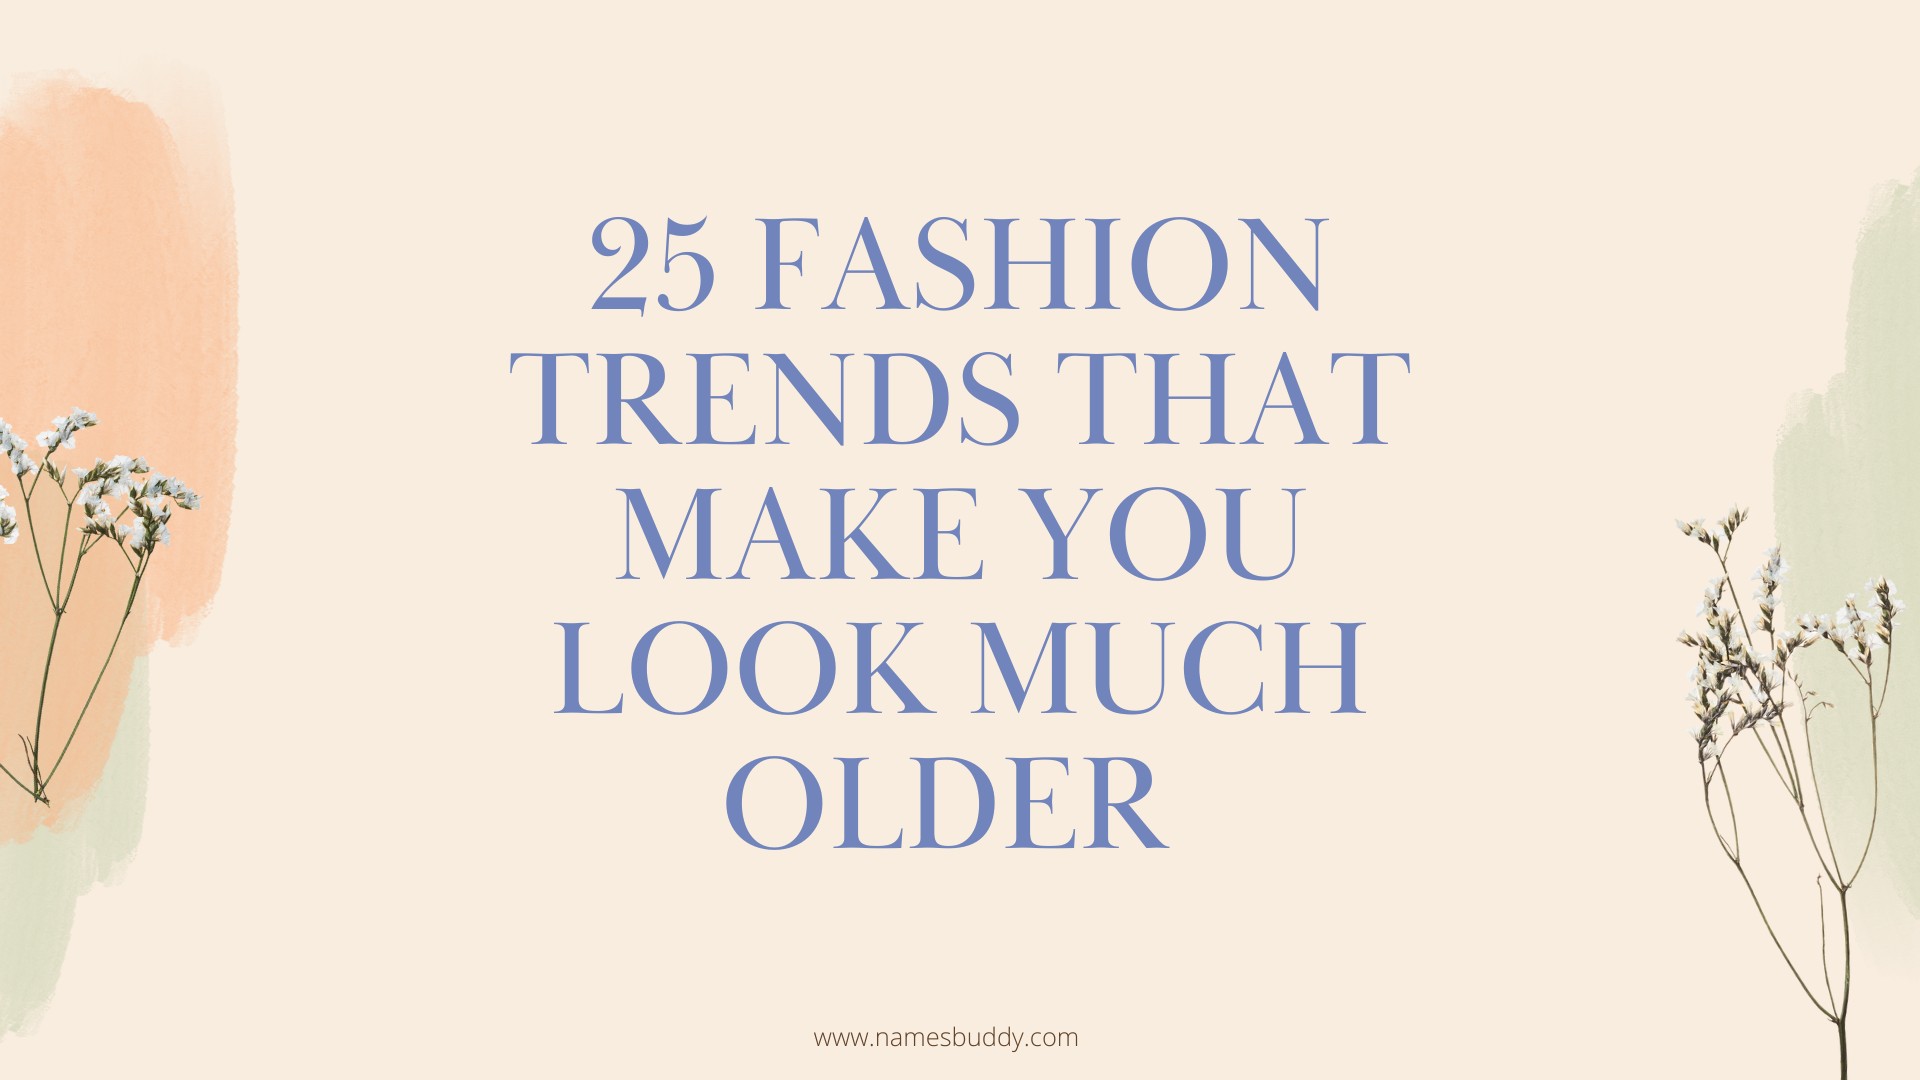 25 Fashion Trends That Make You Look Much Older